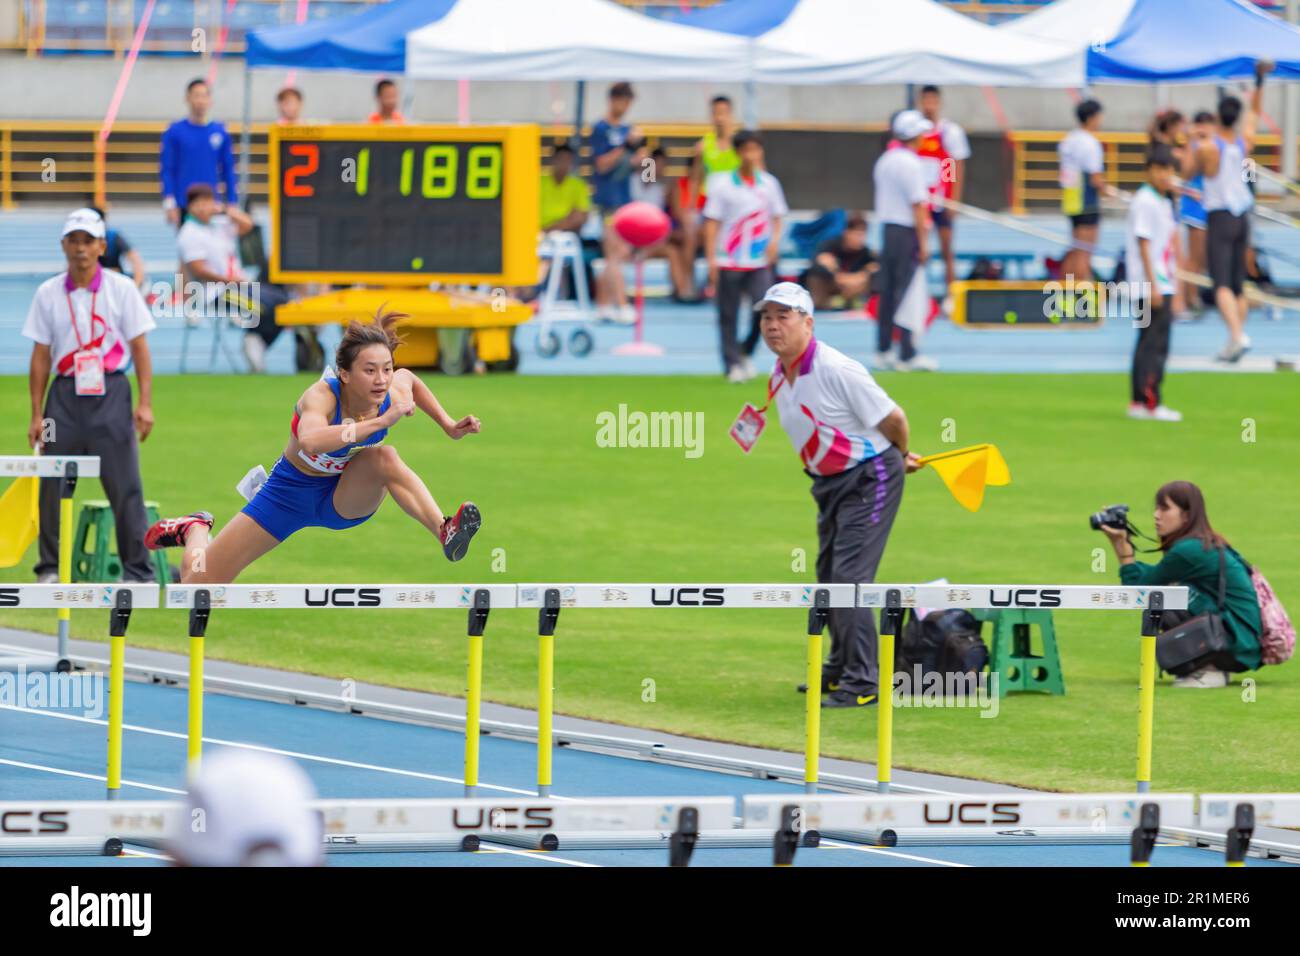 Taiwan, MAR 23 2013 - Hurdles race in The National Games Stock Photo